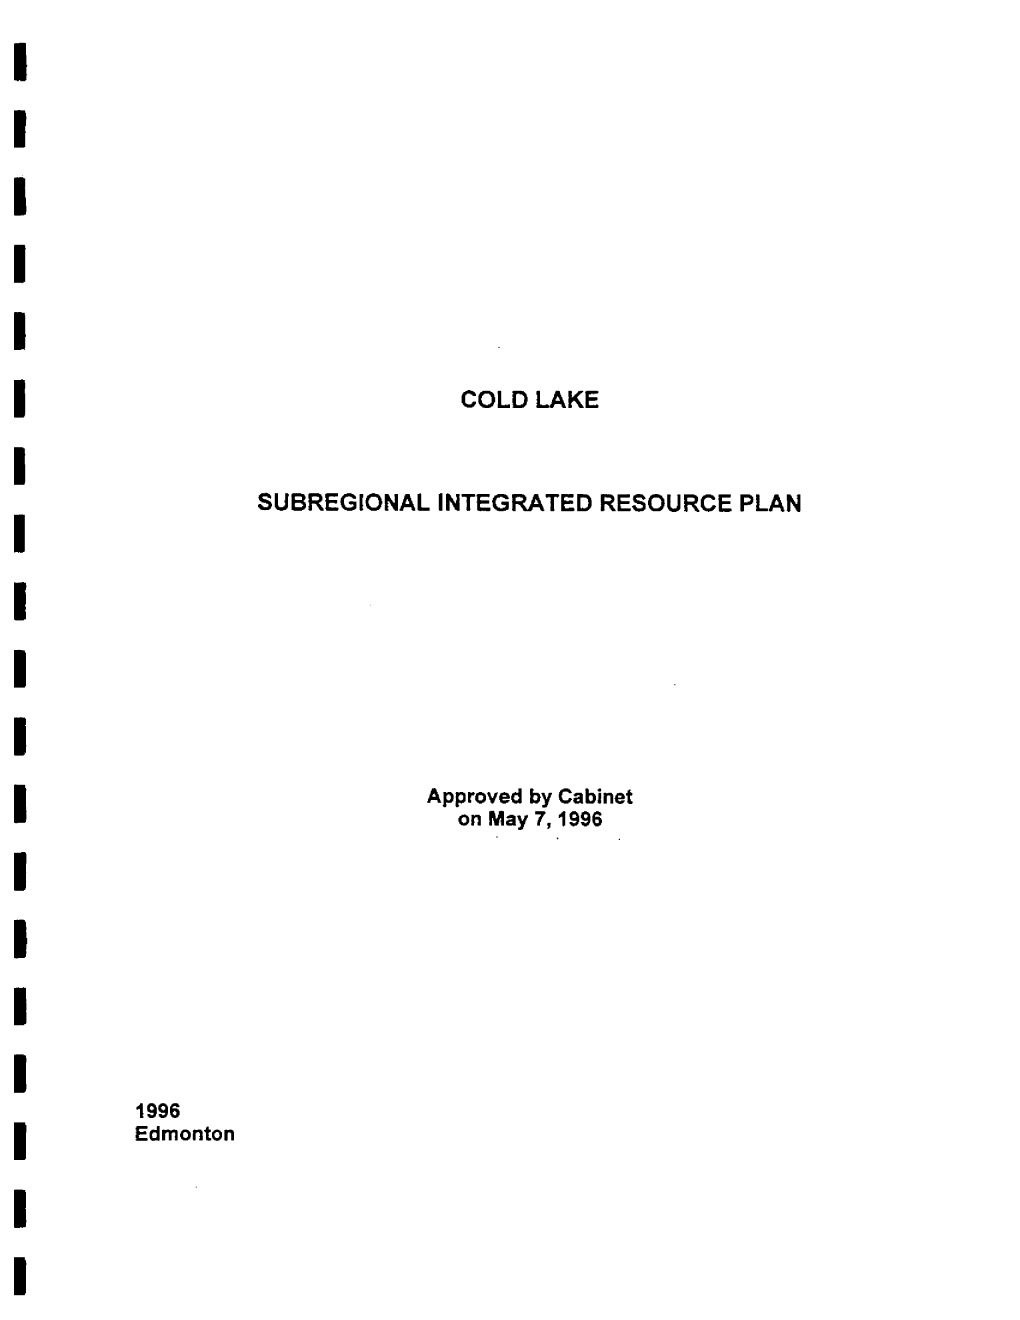 Cold Lake Subregional Integrated Resource Plan